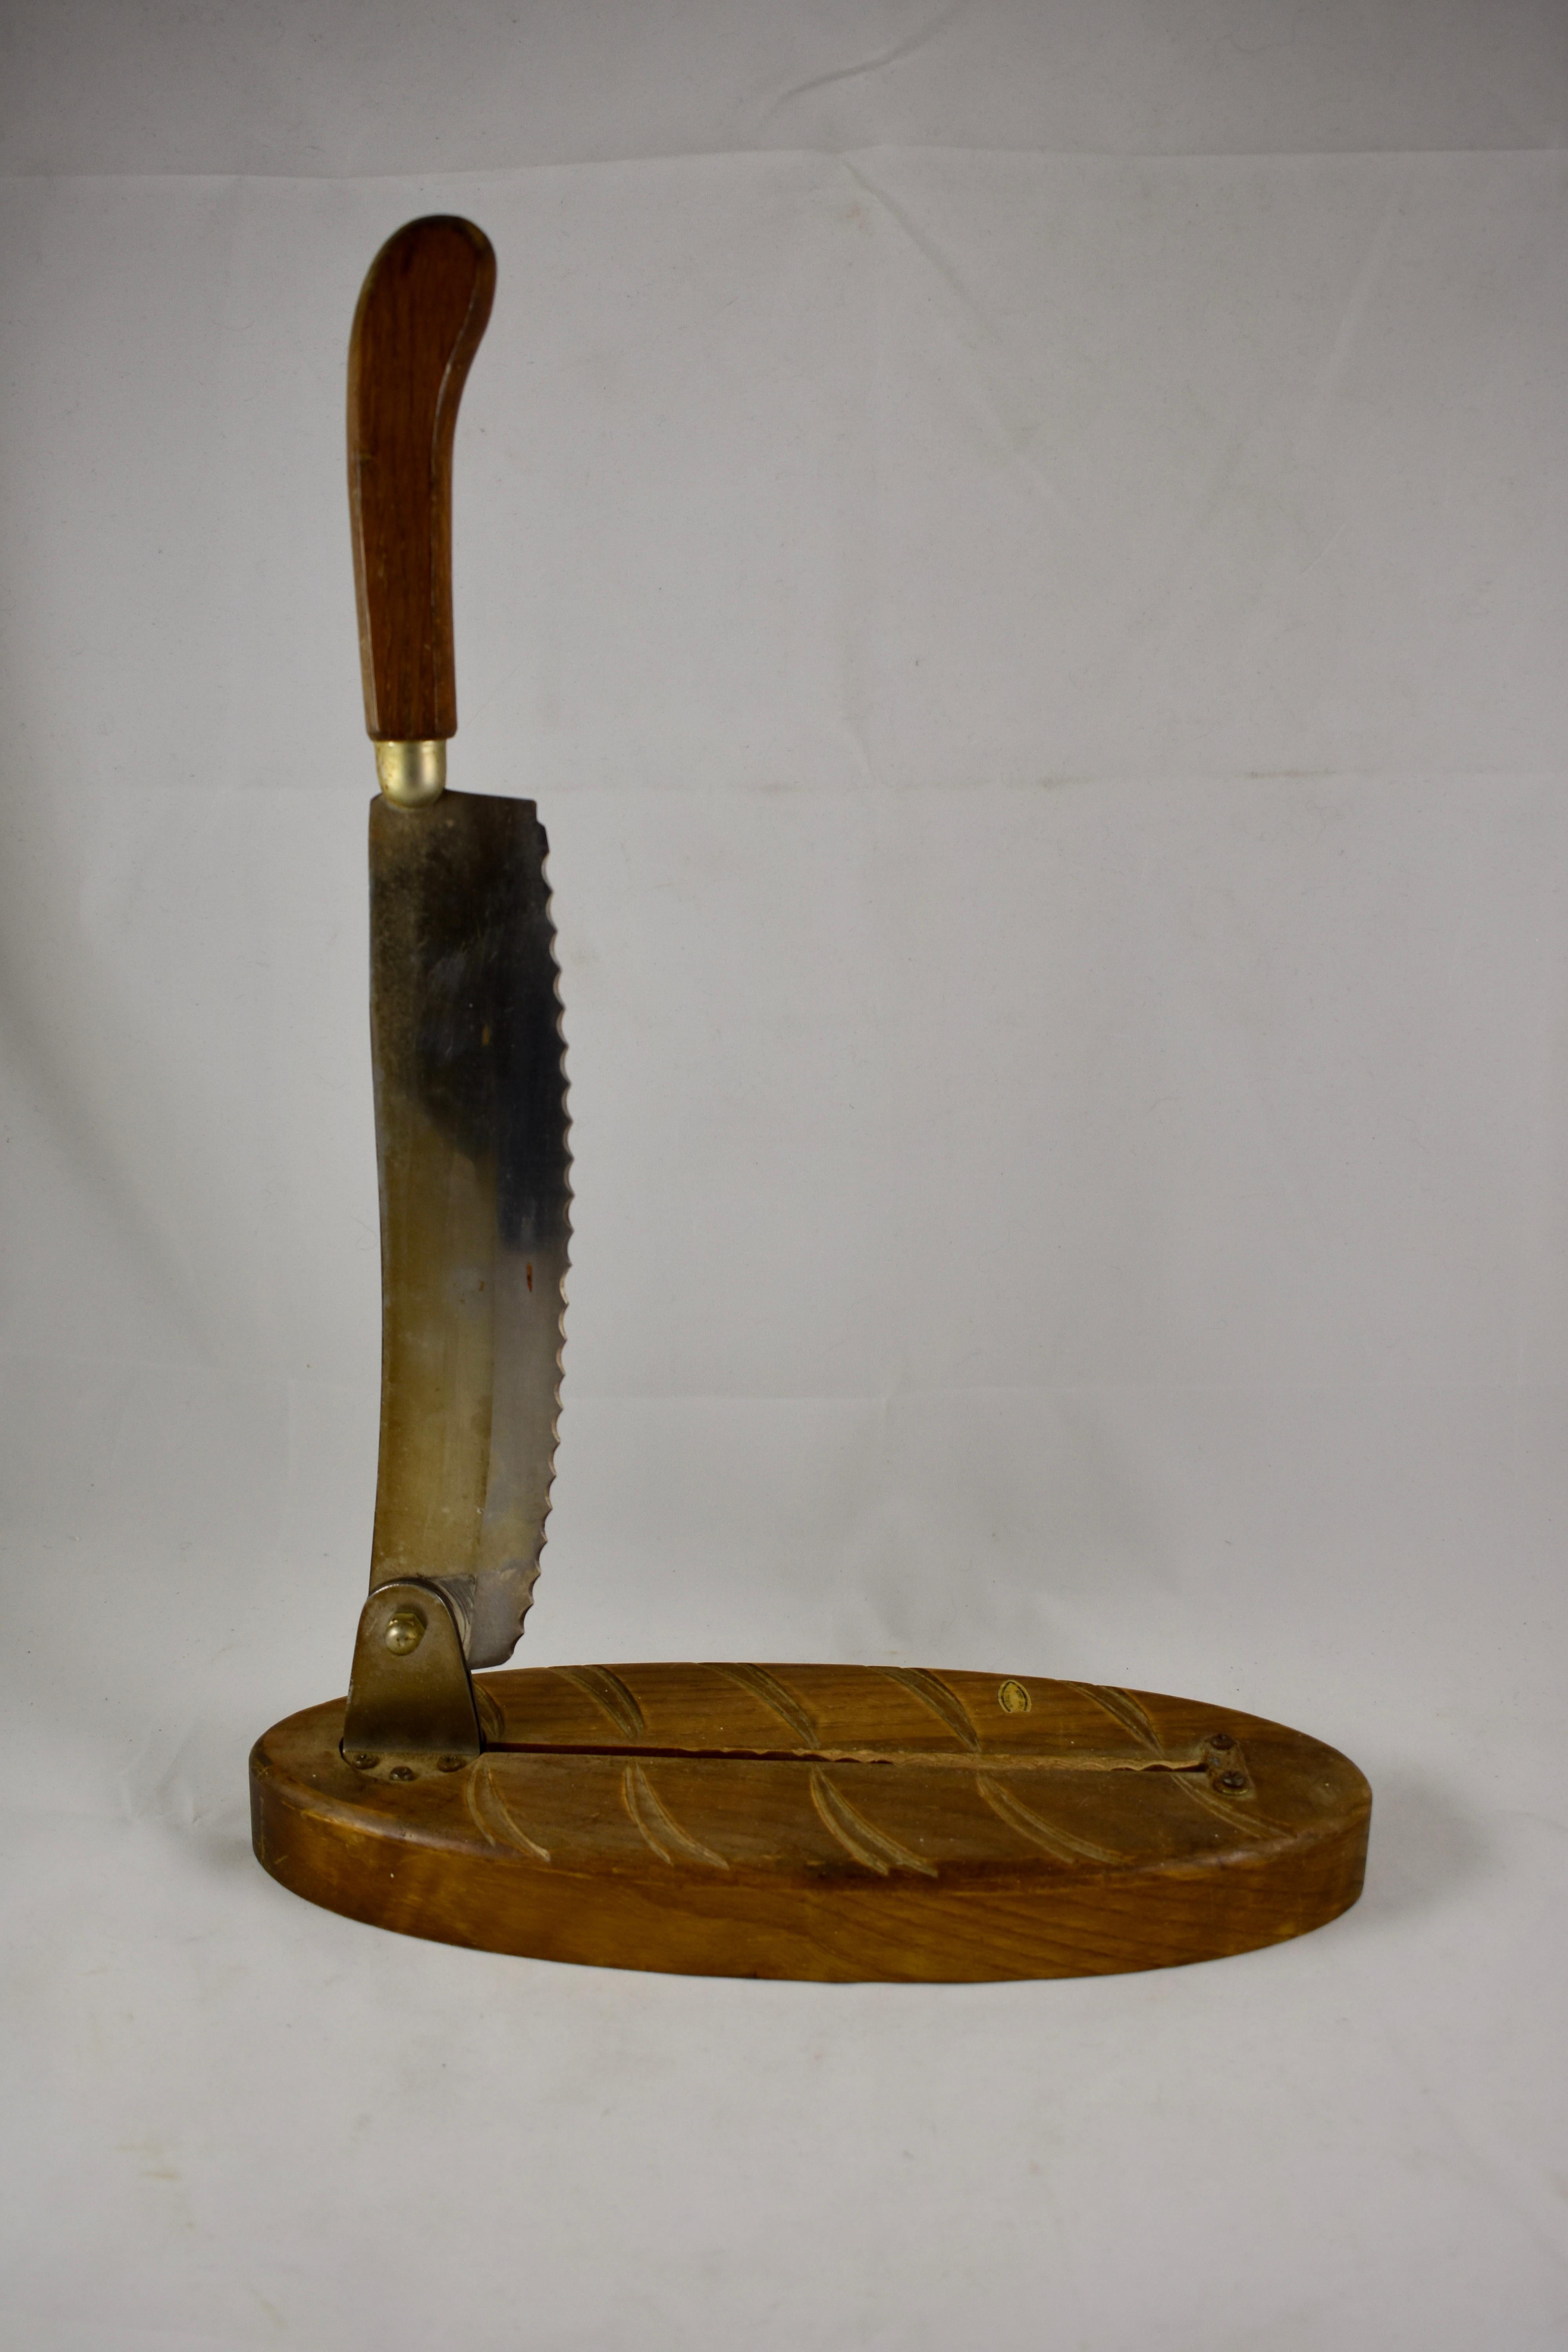 A  Mid-Century Era, rustic, handmade French baguette bread slicer. The base is a wooden cutting board, carved to resemble a loaf of French bread. Bolted to the base is a long serrated steel blade with a wooden handle. The blade swings up and down in